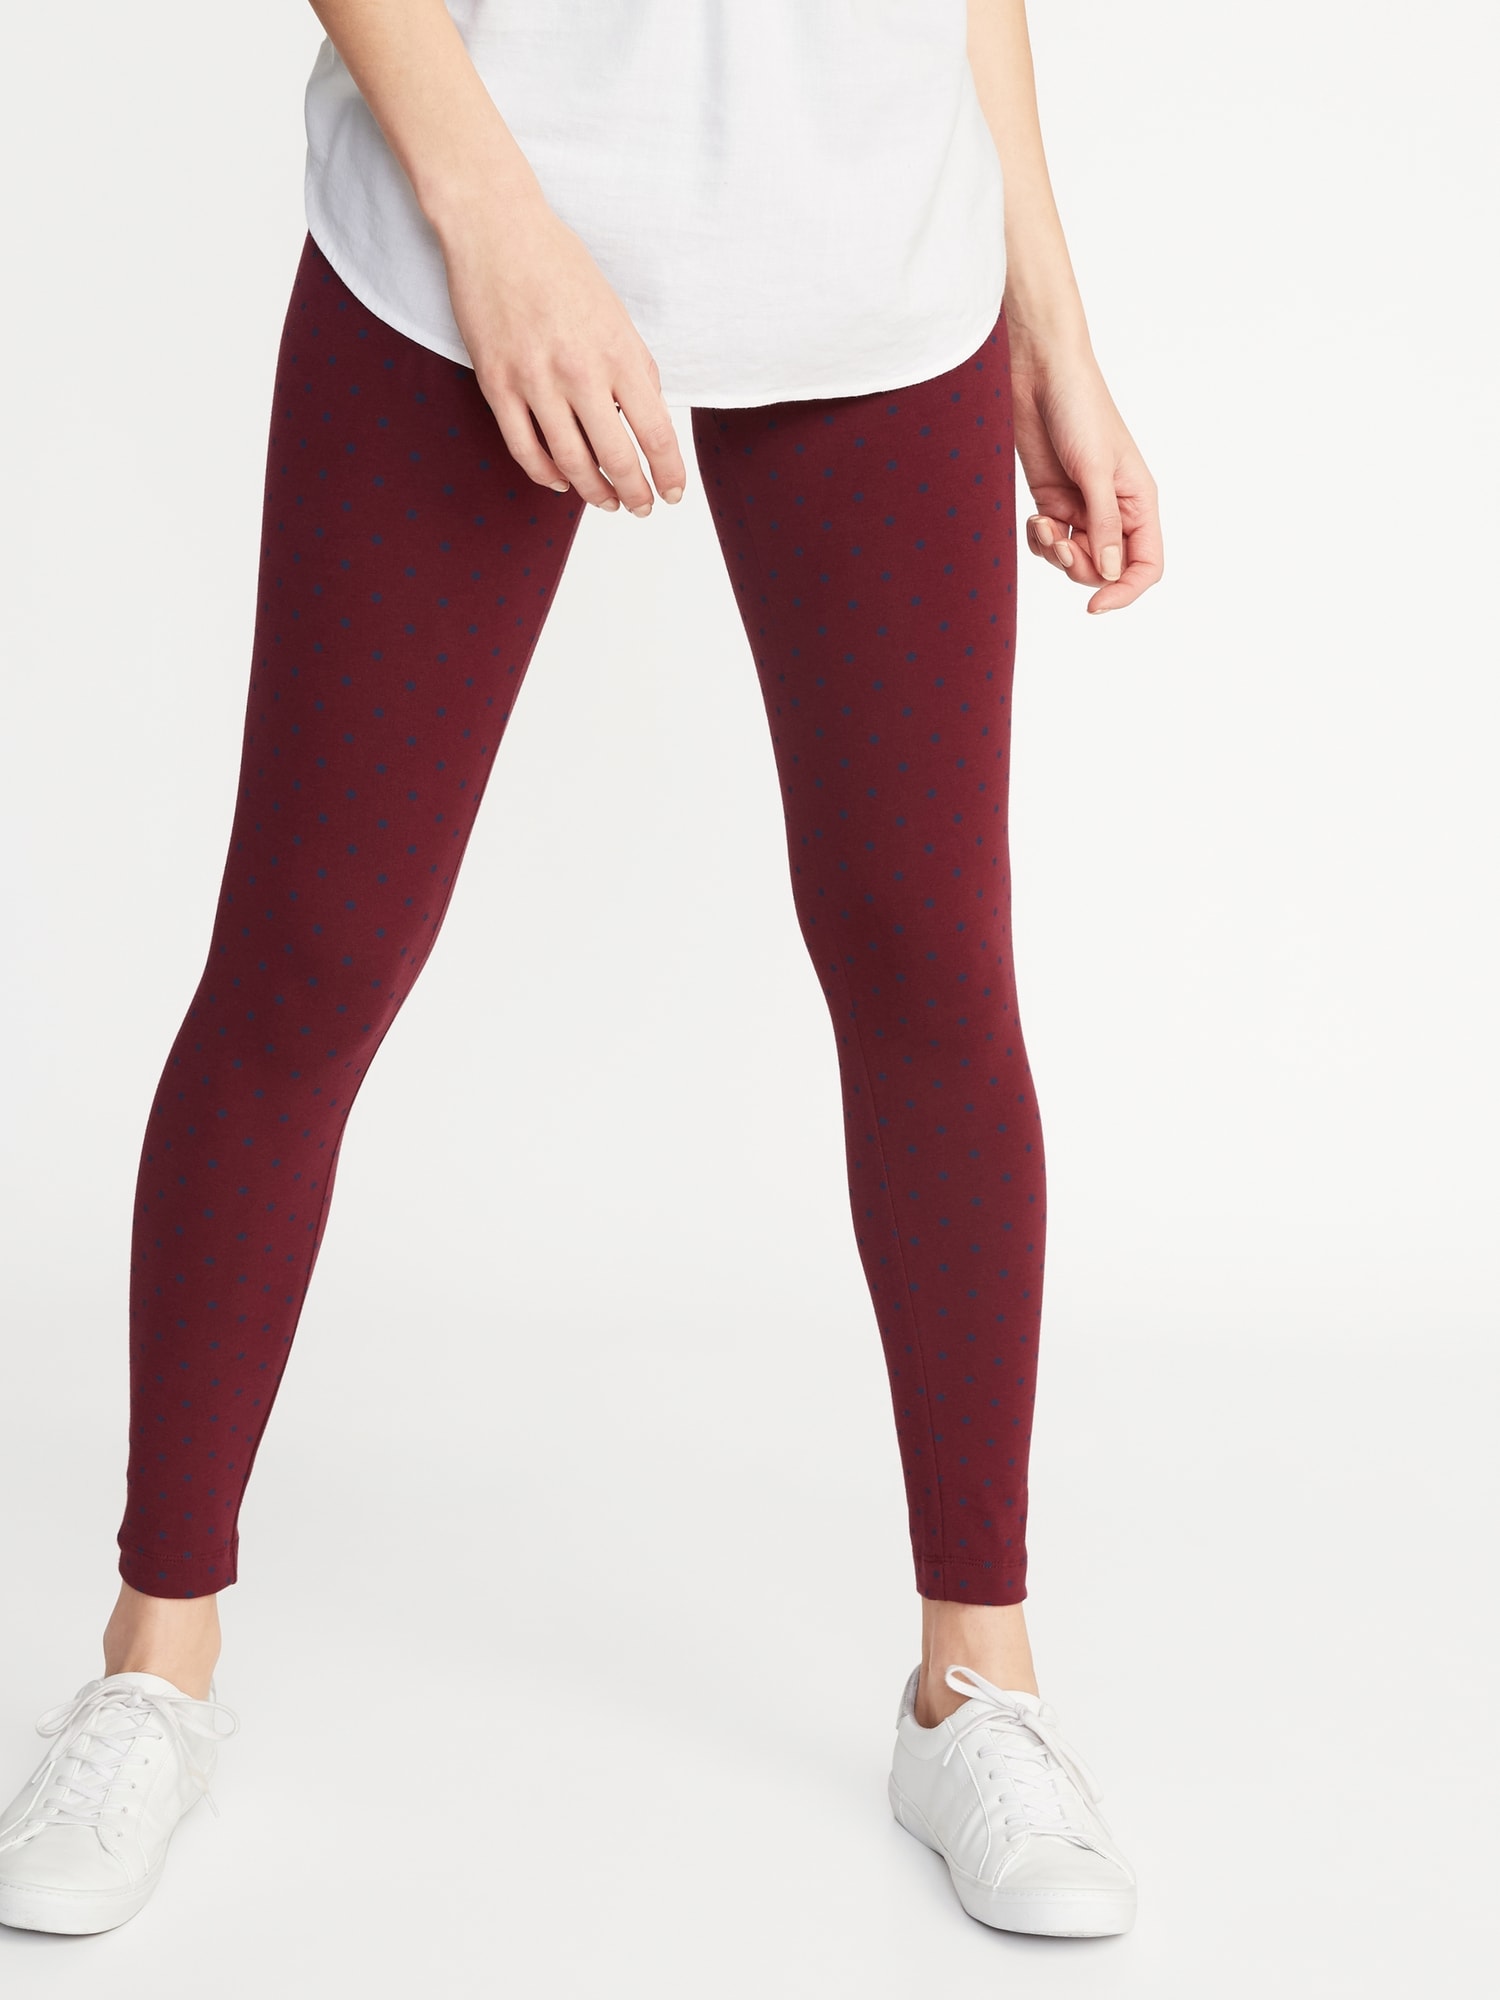 Old Navy Mid-Rise Jersey Leggings 2-Pack, 71 Old Navy Pieces You'll Want  to Get on Sale This Labour Day Weekend (Like $20 Jeans!)